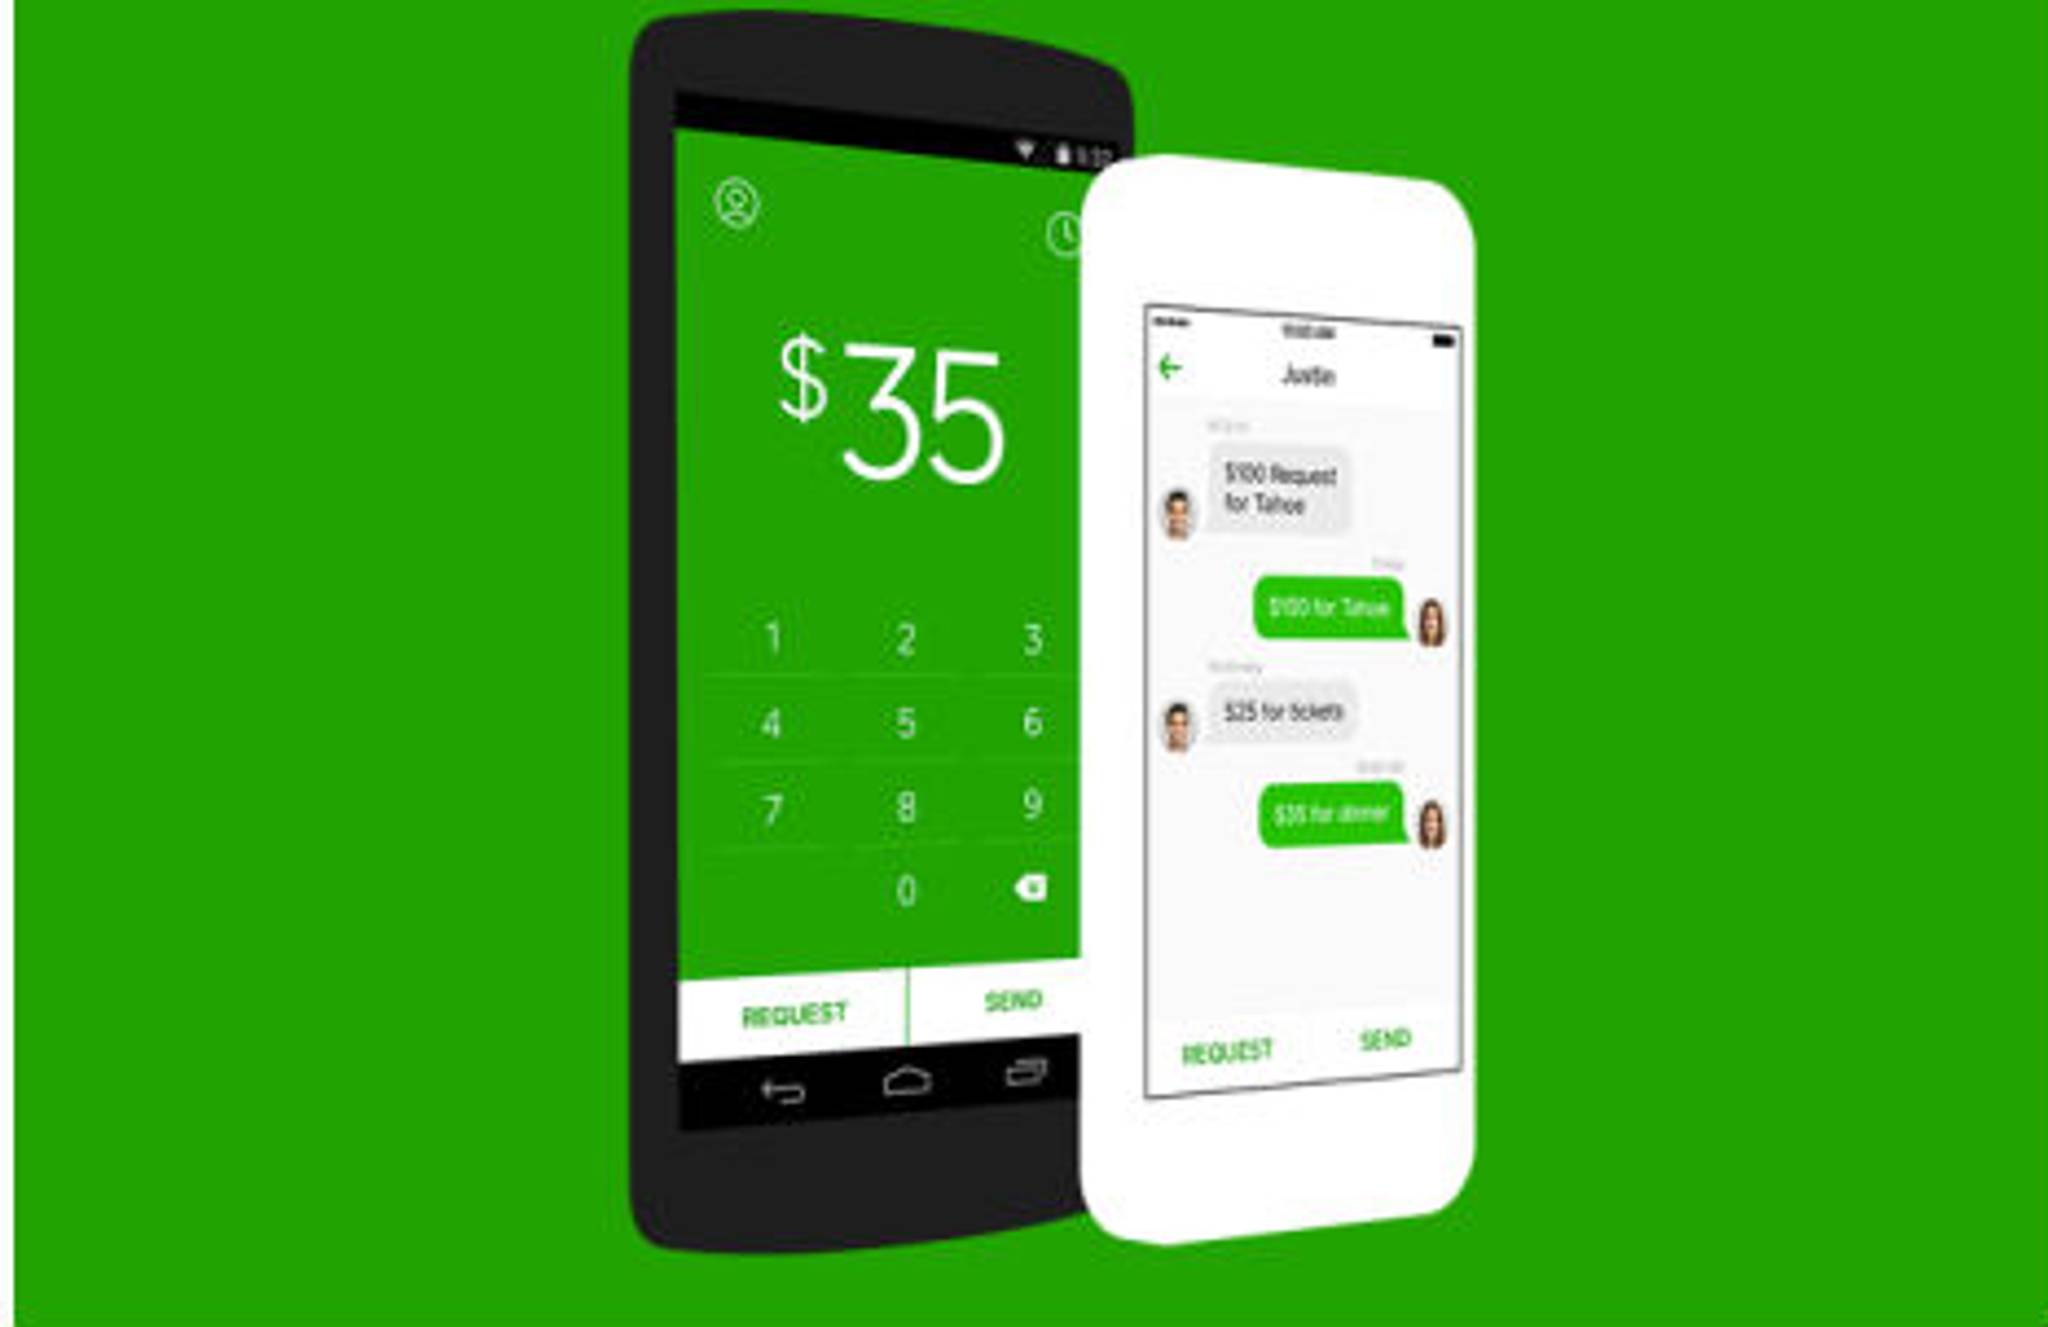 Text or email money with Square's Cash app